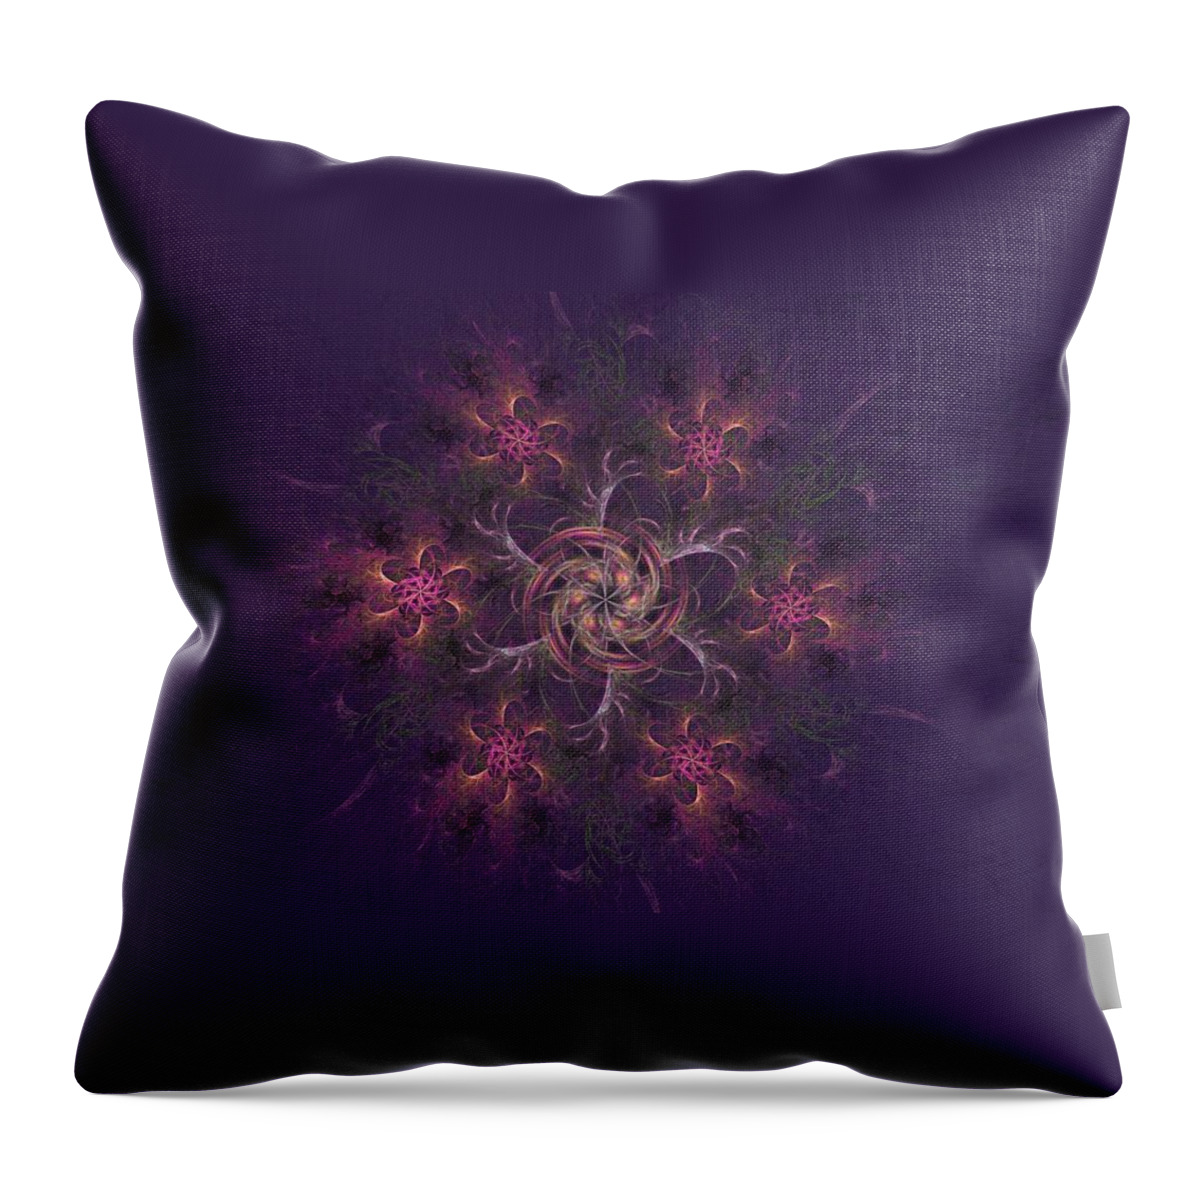 Apophysis Fractal Throw Pillow featuring the digital art Cosmic Floral Wreath by Angie Tirado